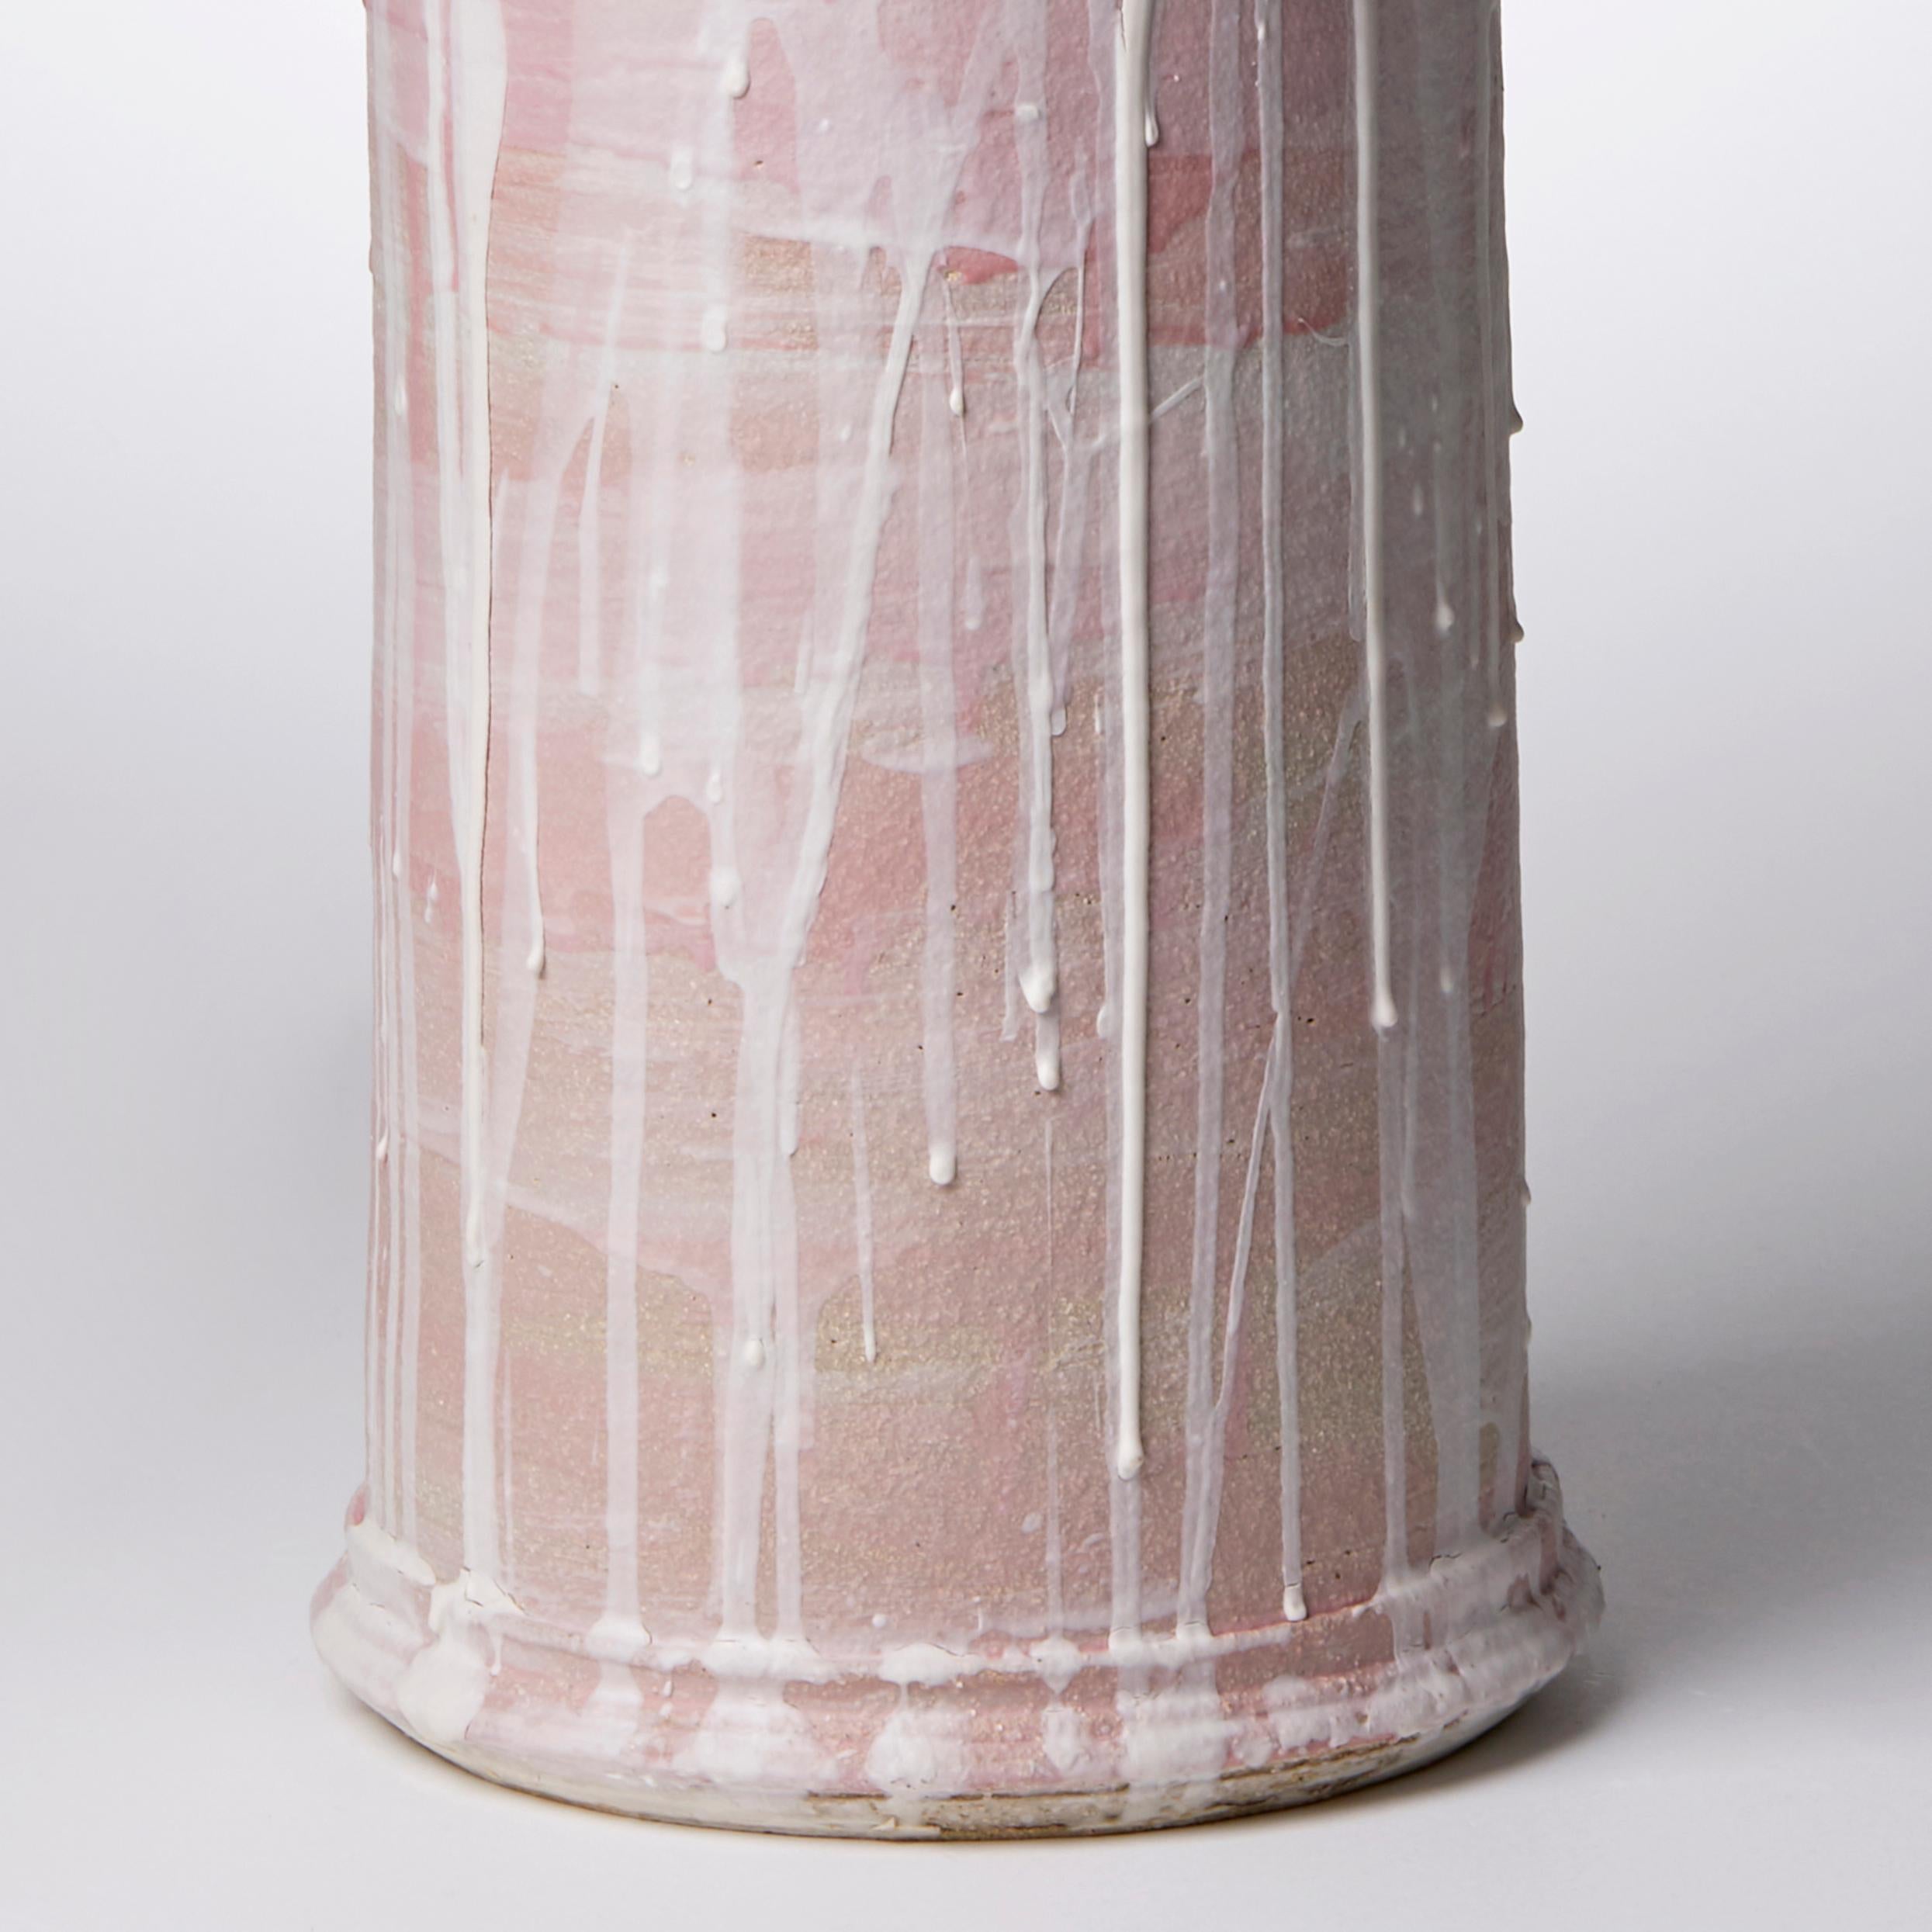 British Colonnade II, a Unique Ceramic Sculptural Vase in Pink & White by Jo Taylor